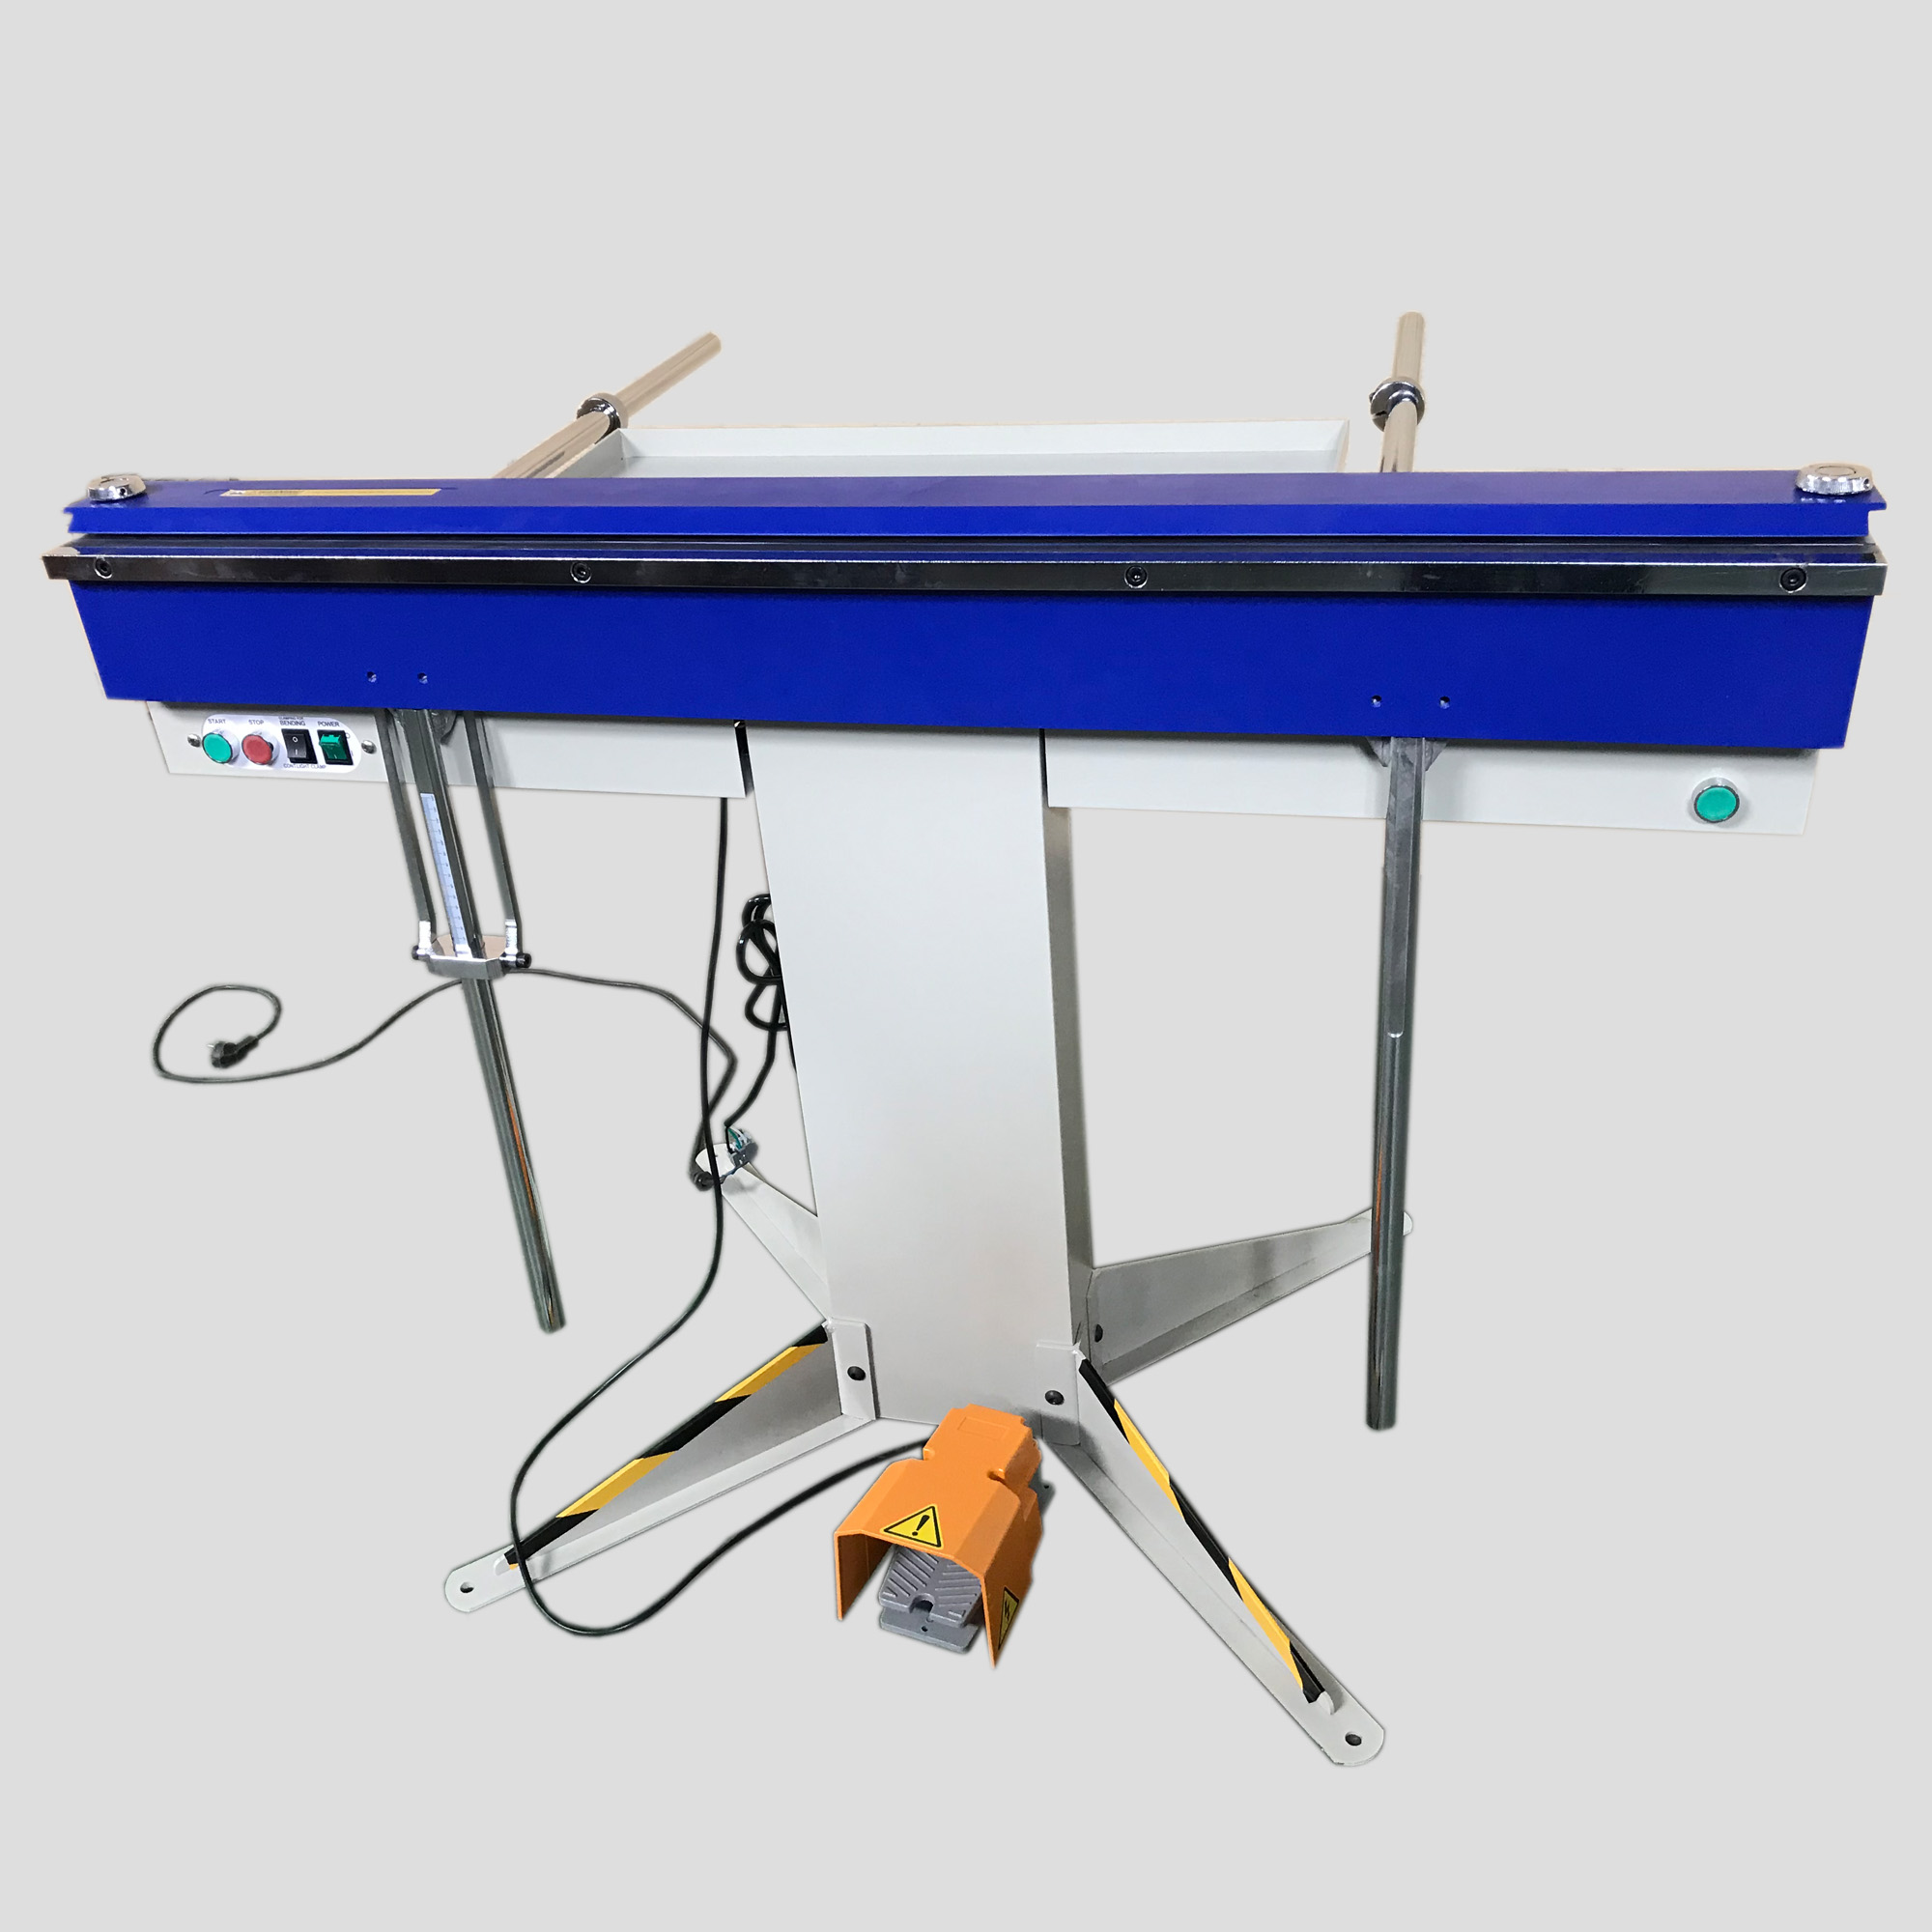 96″ Magnetic bending machine Magnabend 1250E Featured Image